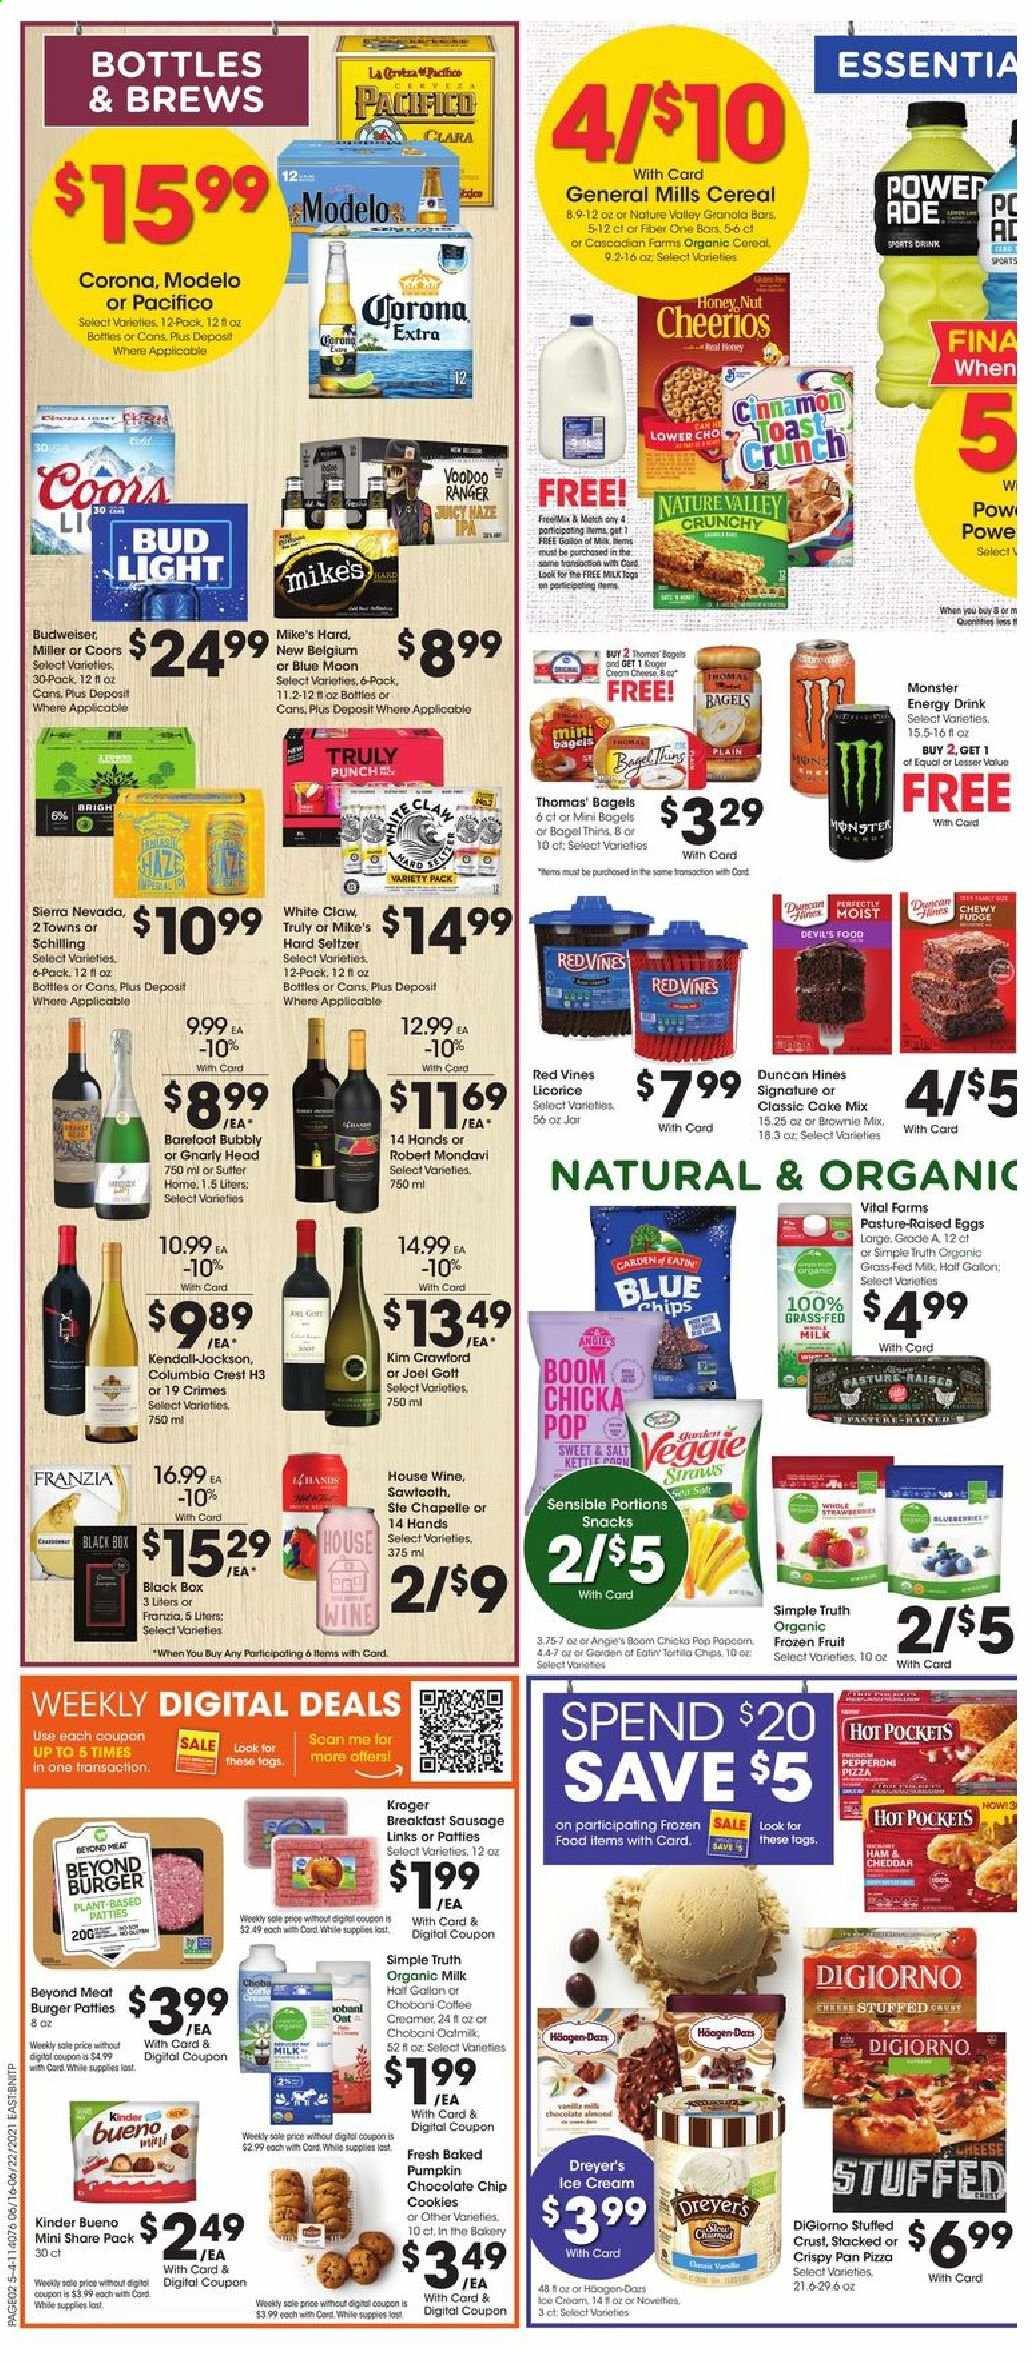 thumbnail - Fred Meyer Flyer - 06/16/2021 - 06/22/2021 - Sales products - Budweiser, Coors, Blue Moon, bagels, brownie mix, cake mix, pumpkin, pizza, hamburger, ham, sausage, pepperoni, Chobani, organic milk, oat milk, eggs, creamer, ice cream, organic frozen fruit, cookies, fudge, chocolate chips, Kinder Bueno, Thins, cereals, Cheerios, granola bar, Nature Valley, Fiber One, energy drink, Monster, L'Or, wine, punch, White Claw, Hard Seltzer, TRULY, beer, Bud Light, Corona Extra, Miller, Modelo, burger patties, Crest, gallon, pan, jar. Page 2.